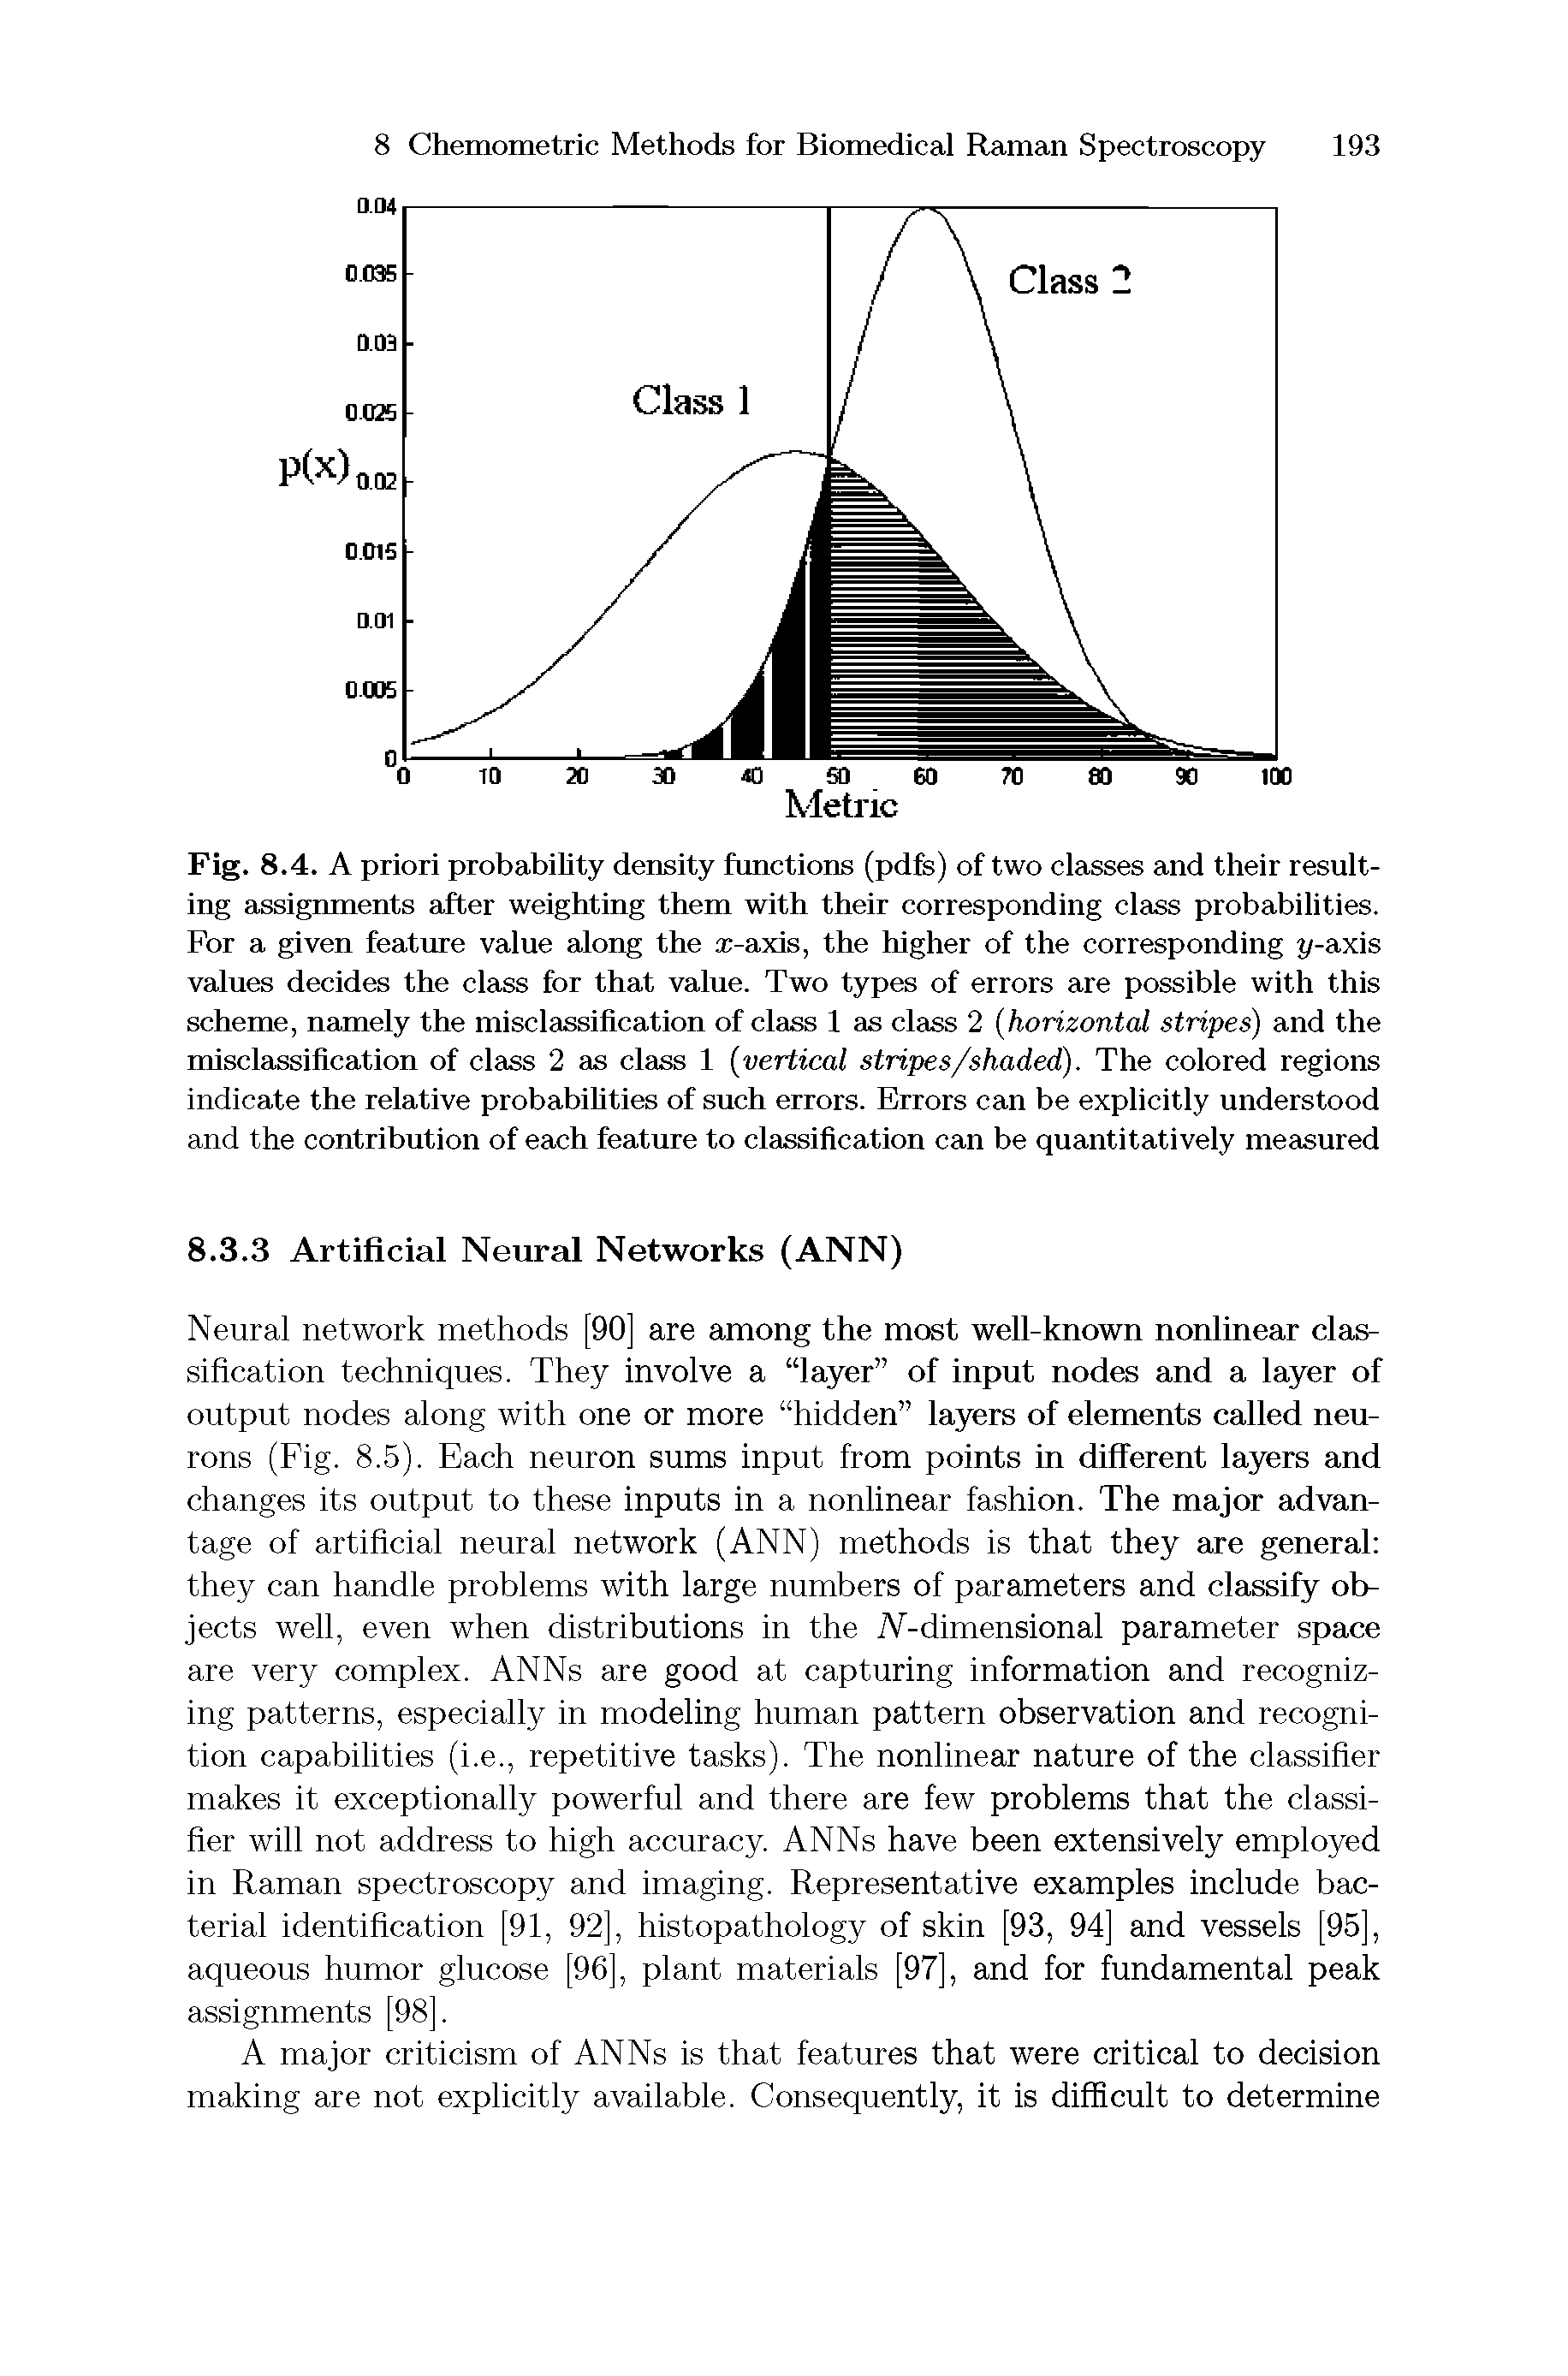 Fig. 8.4. A priori probability density functions (pdfs) of two classes and their resulting assignments after weighting them with their corresponding class probabilities. For a given feature value along the x-axis, the higher of the corresponding y-axis values decides the class for that value. Two types of errors are possible with this scheme, namely the misclassification of class 1 as class 2 (horizontal stripes) and the misclassification of class 2 as class 1 (vertical stripes/shaded). The colored regions indicate the relative probabilities of such errors. Errors can be explicitly understood and the contribution of each feature to classification can be quantitatively measured...